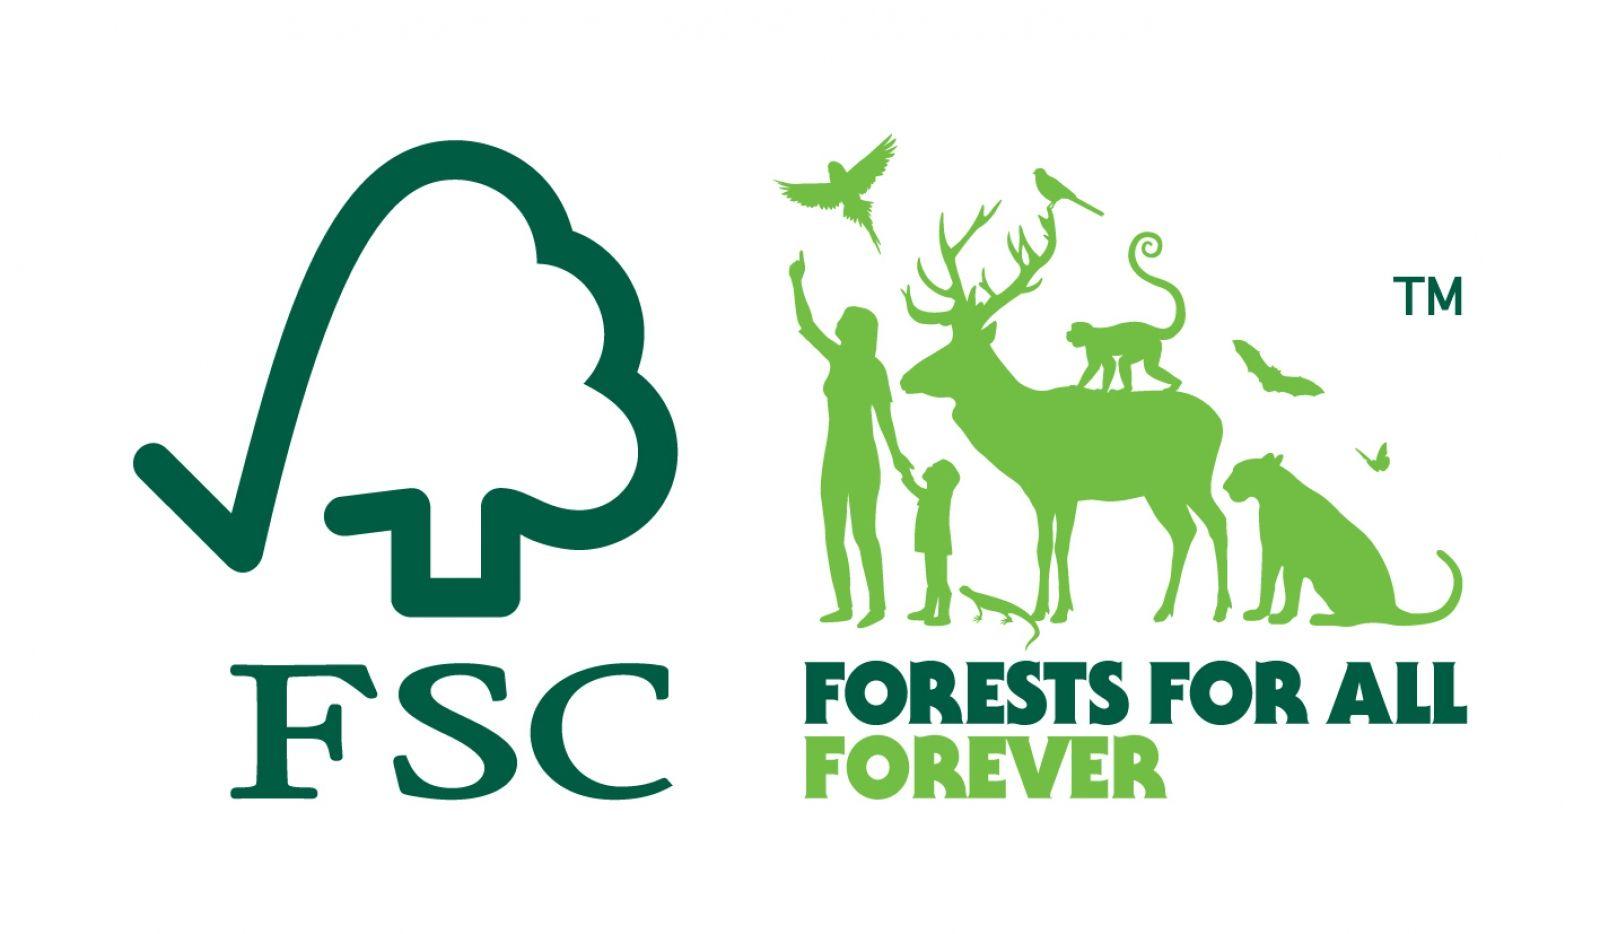 Forestry Logo - FSC® Launches New Global Brand: Forests For All Forever 30 04 2015